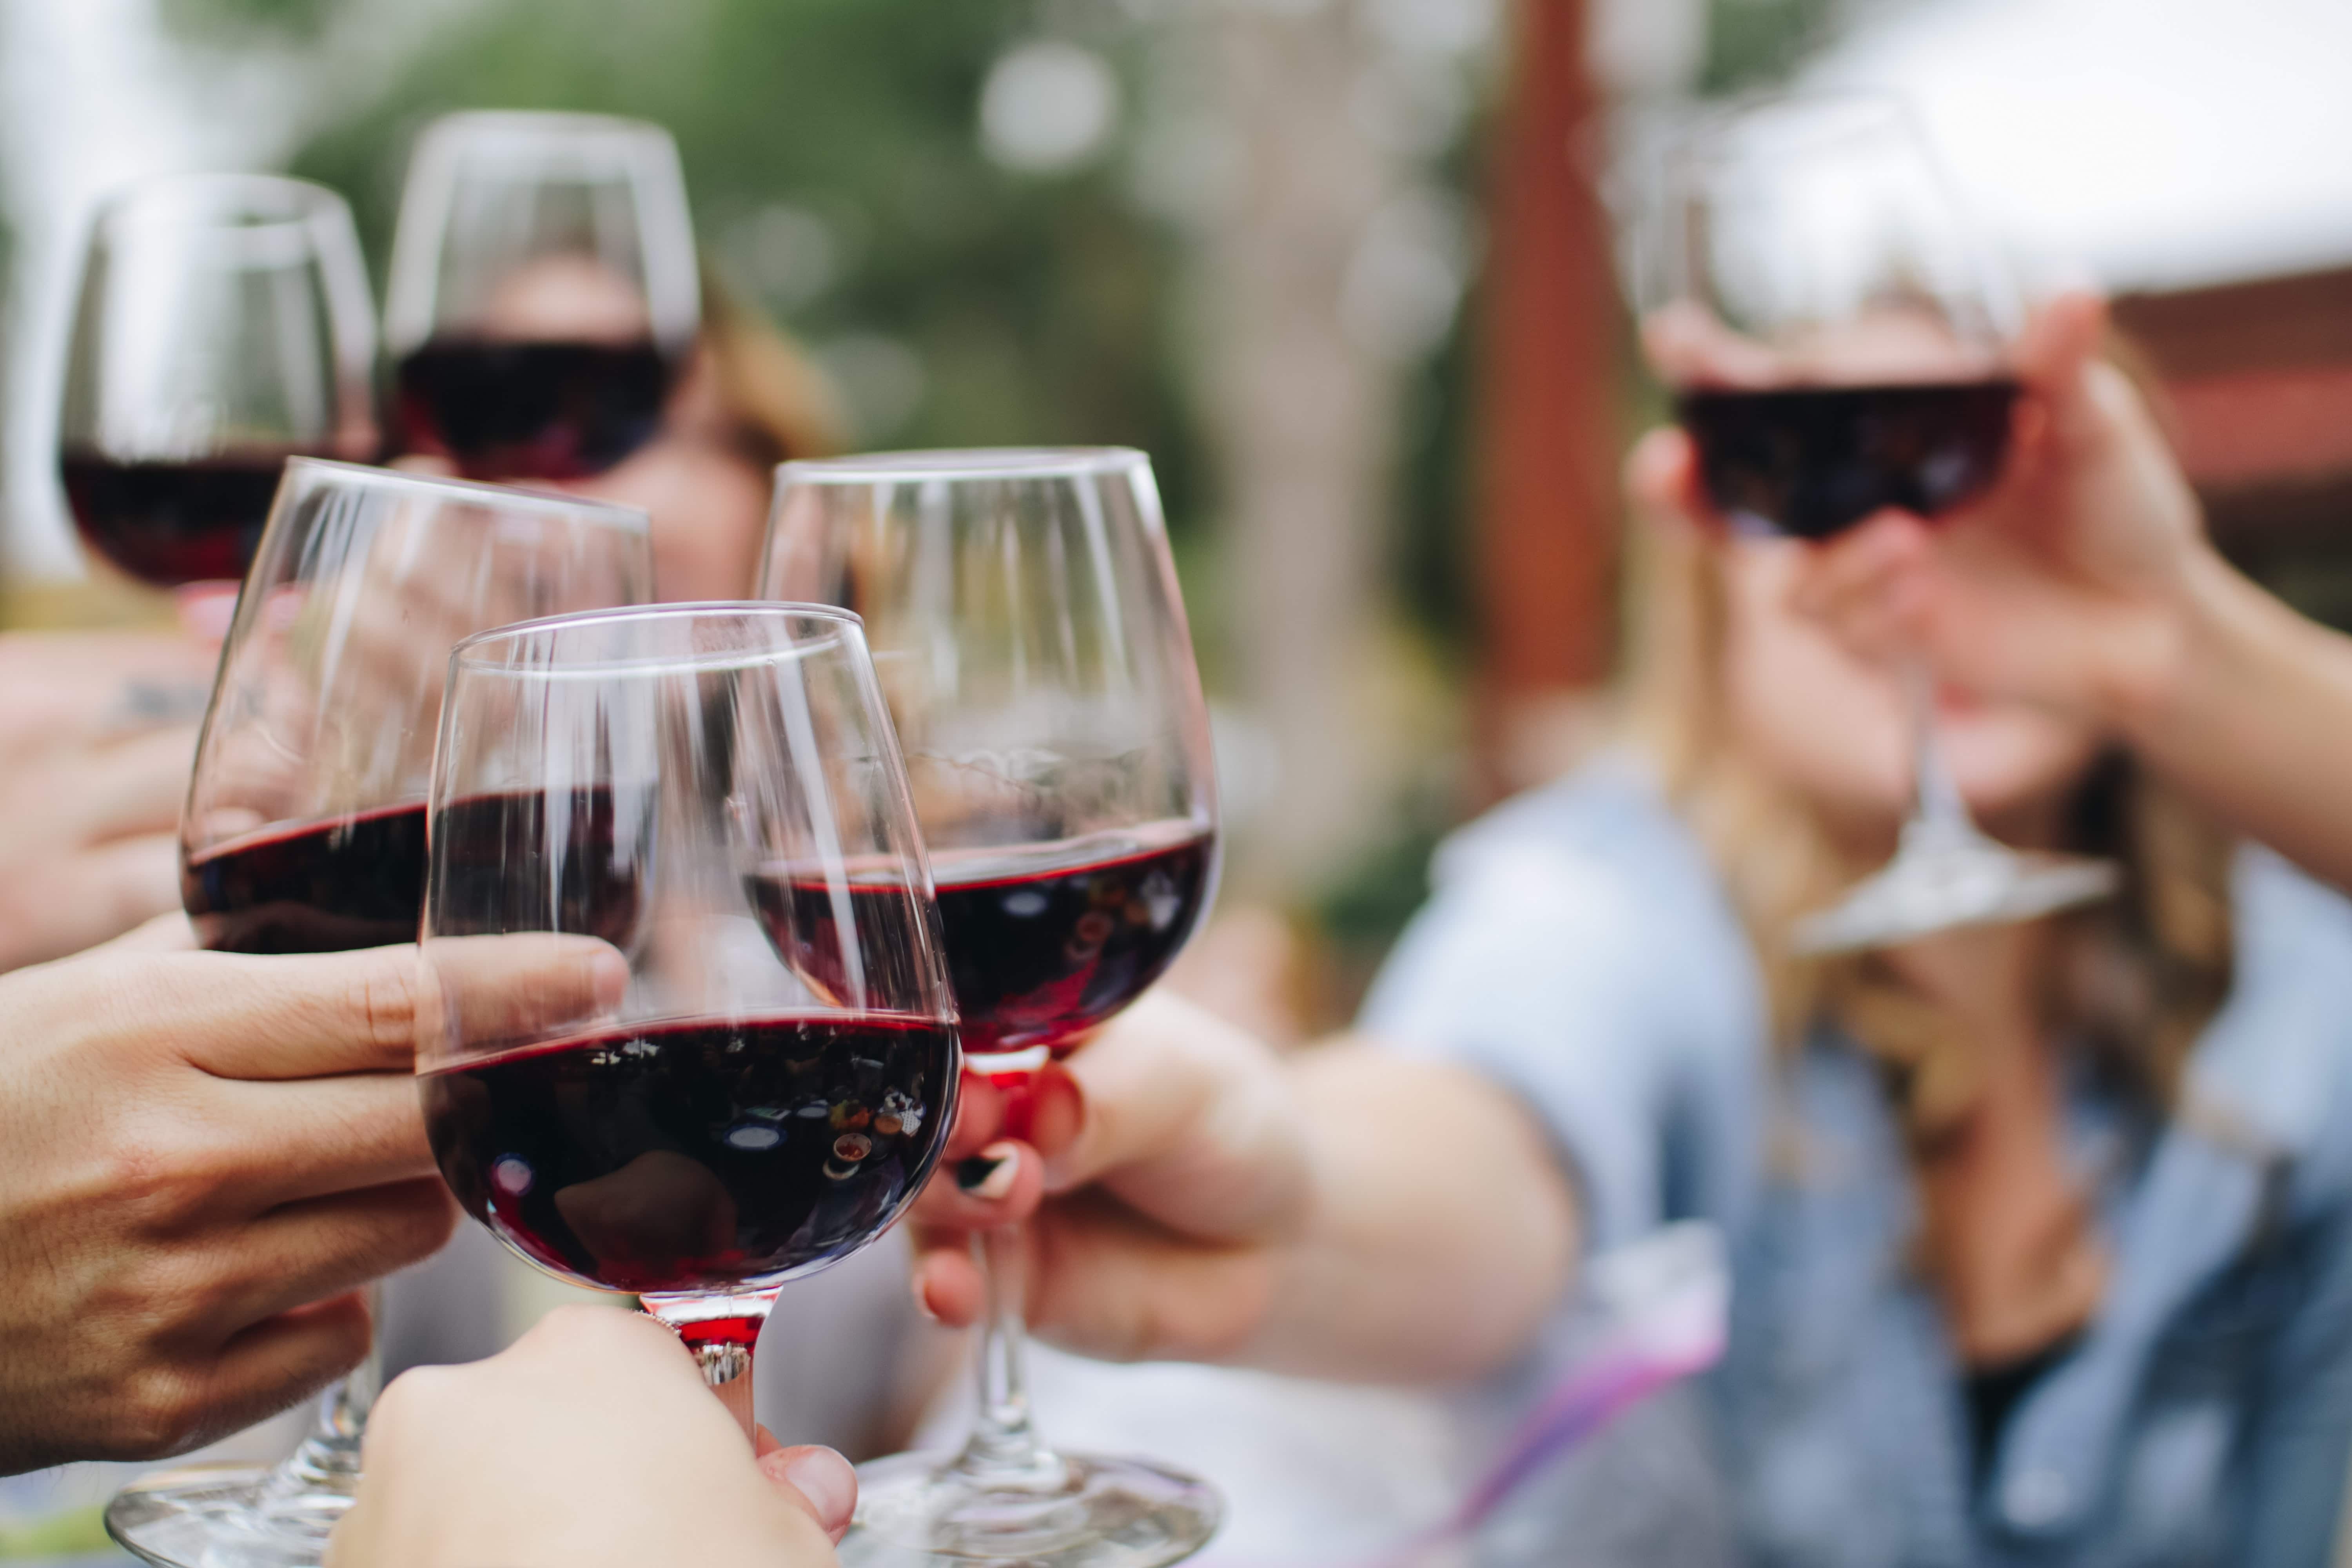 Wine drinkers toast their glasses of red vintages.